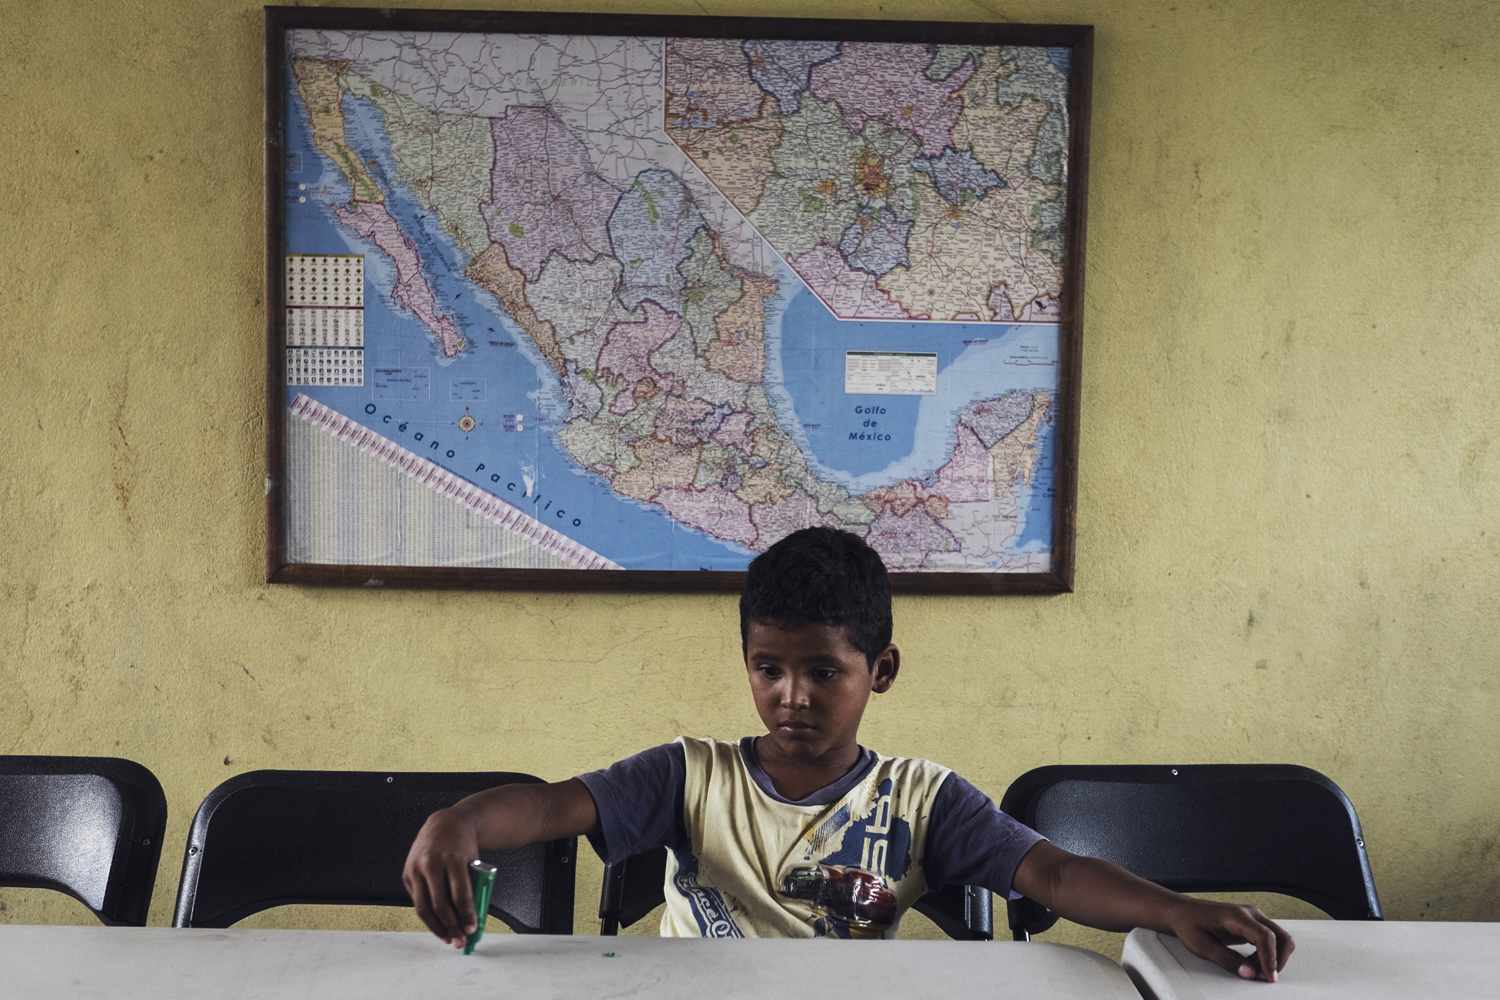 At 'La 72,' a shelter for migrants near the Mexico-Guatemala border, 90 percent of current residents are Honduran. They are waiting for 'La Bestia,' the train that will take them north. At this moment, it had not arrived for six days. There is no time limit to how long people can stay for free at 'La 72' but the facilities are becoming stretched to capacity. Tenosique, Mexico. July 24, 2014.